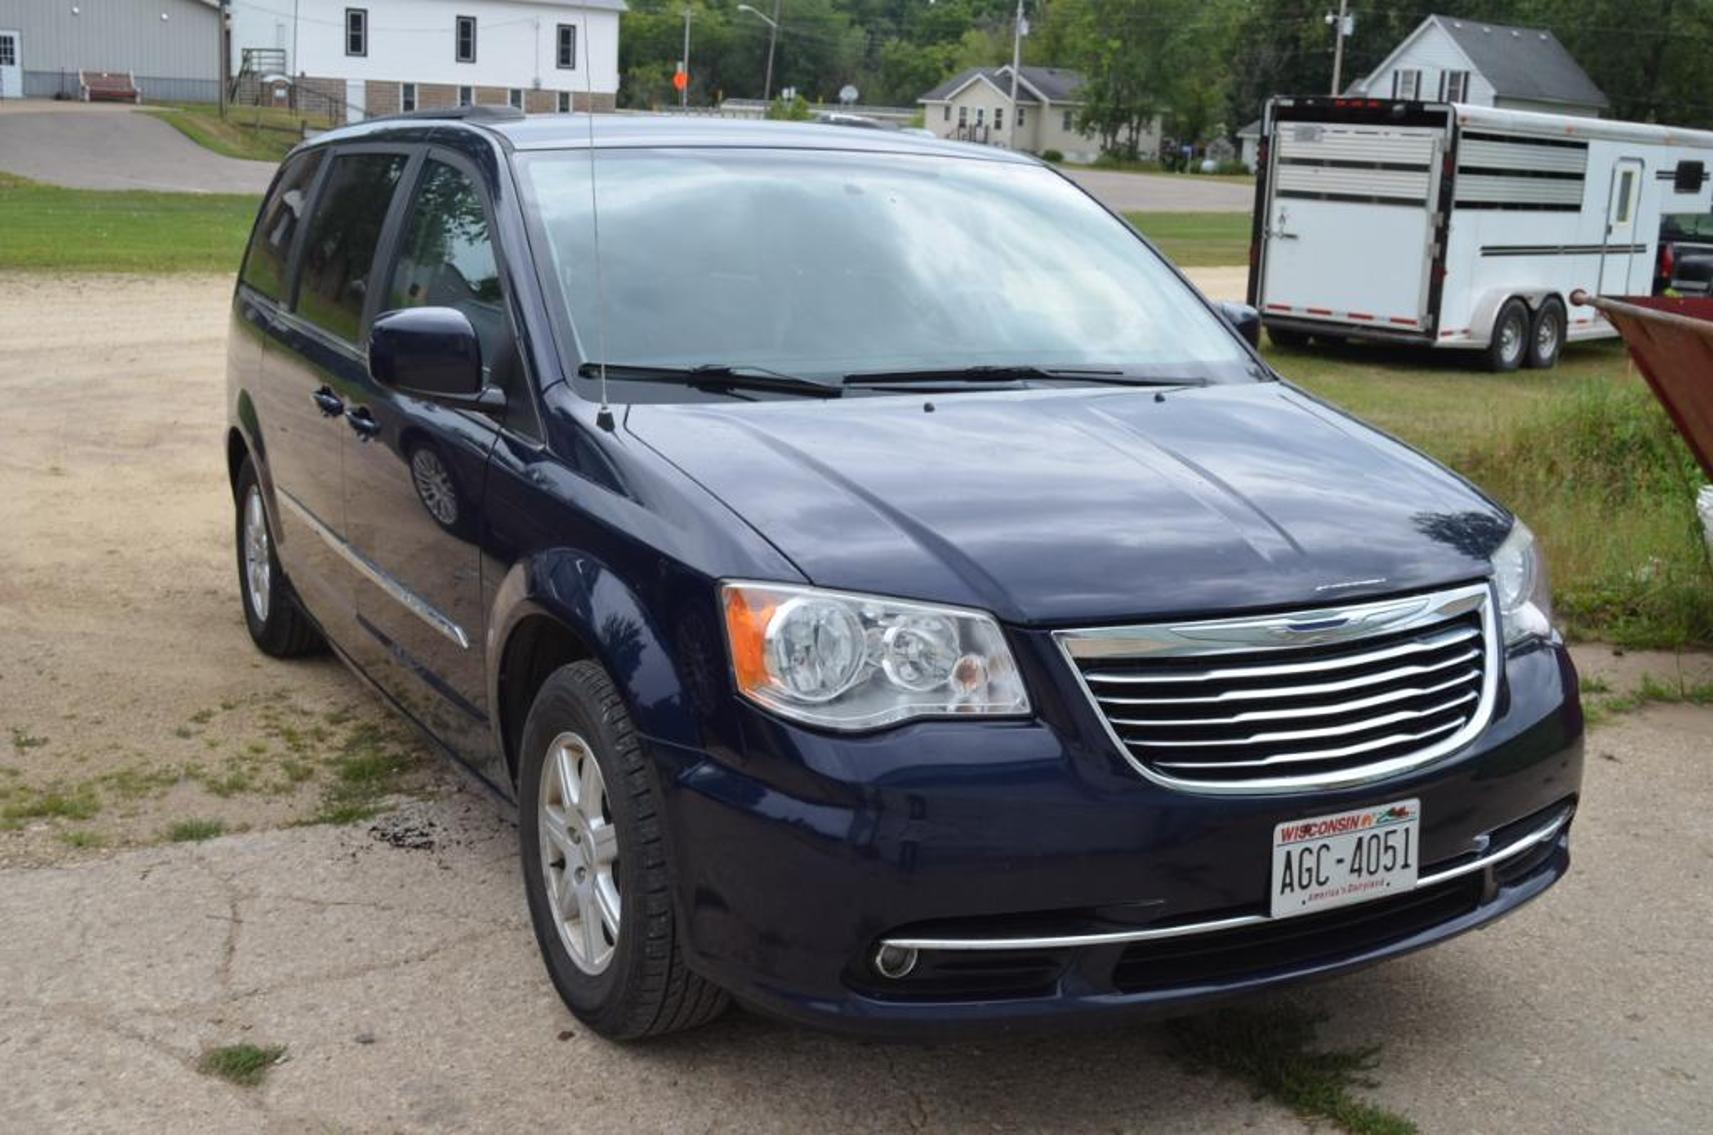 2012 Chrysler Town & Country With Lift, Chevrolet 3500, 24’ Horse Trailer, Tools, Household, Vintage Furniture